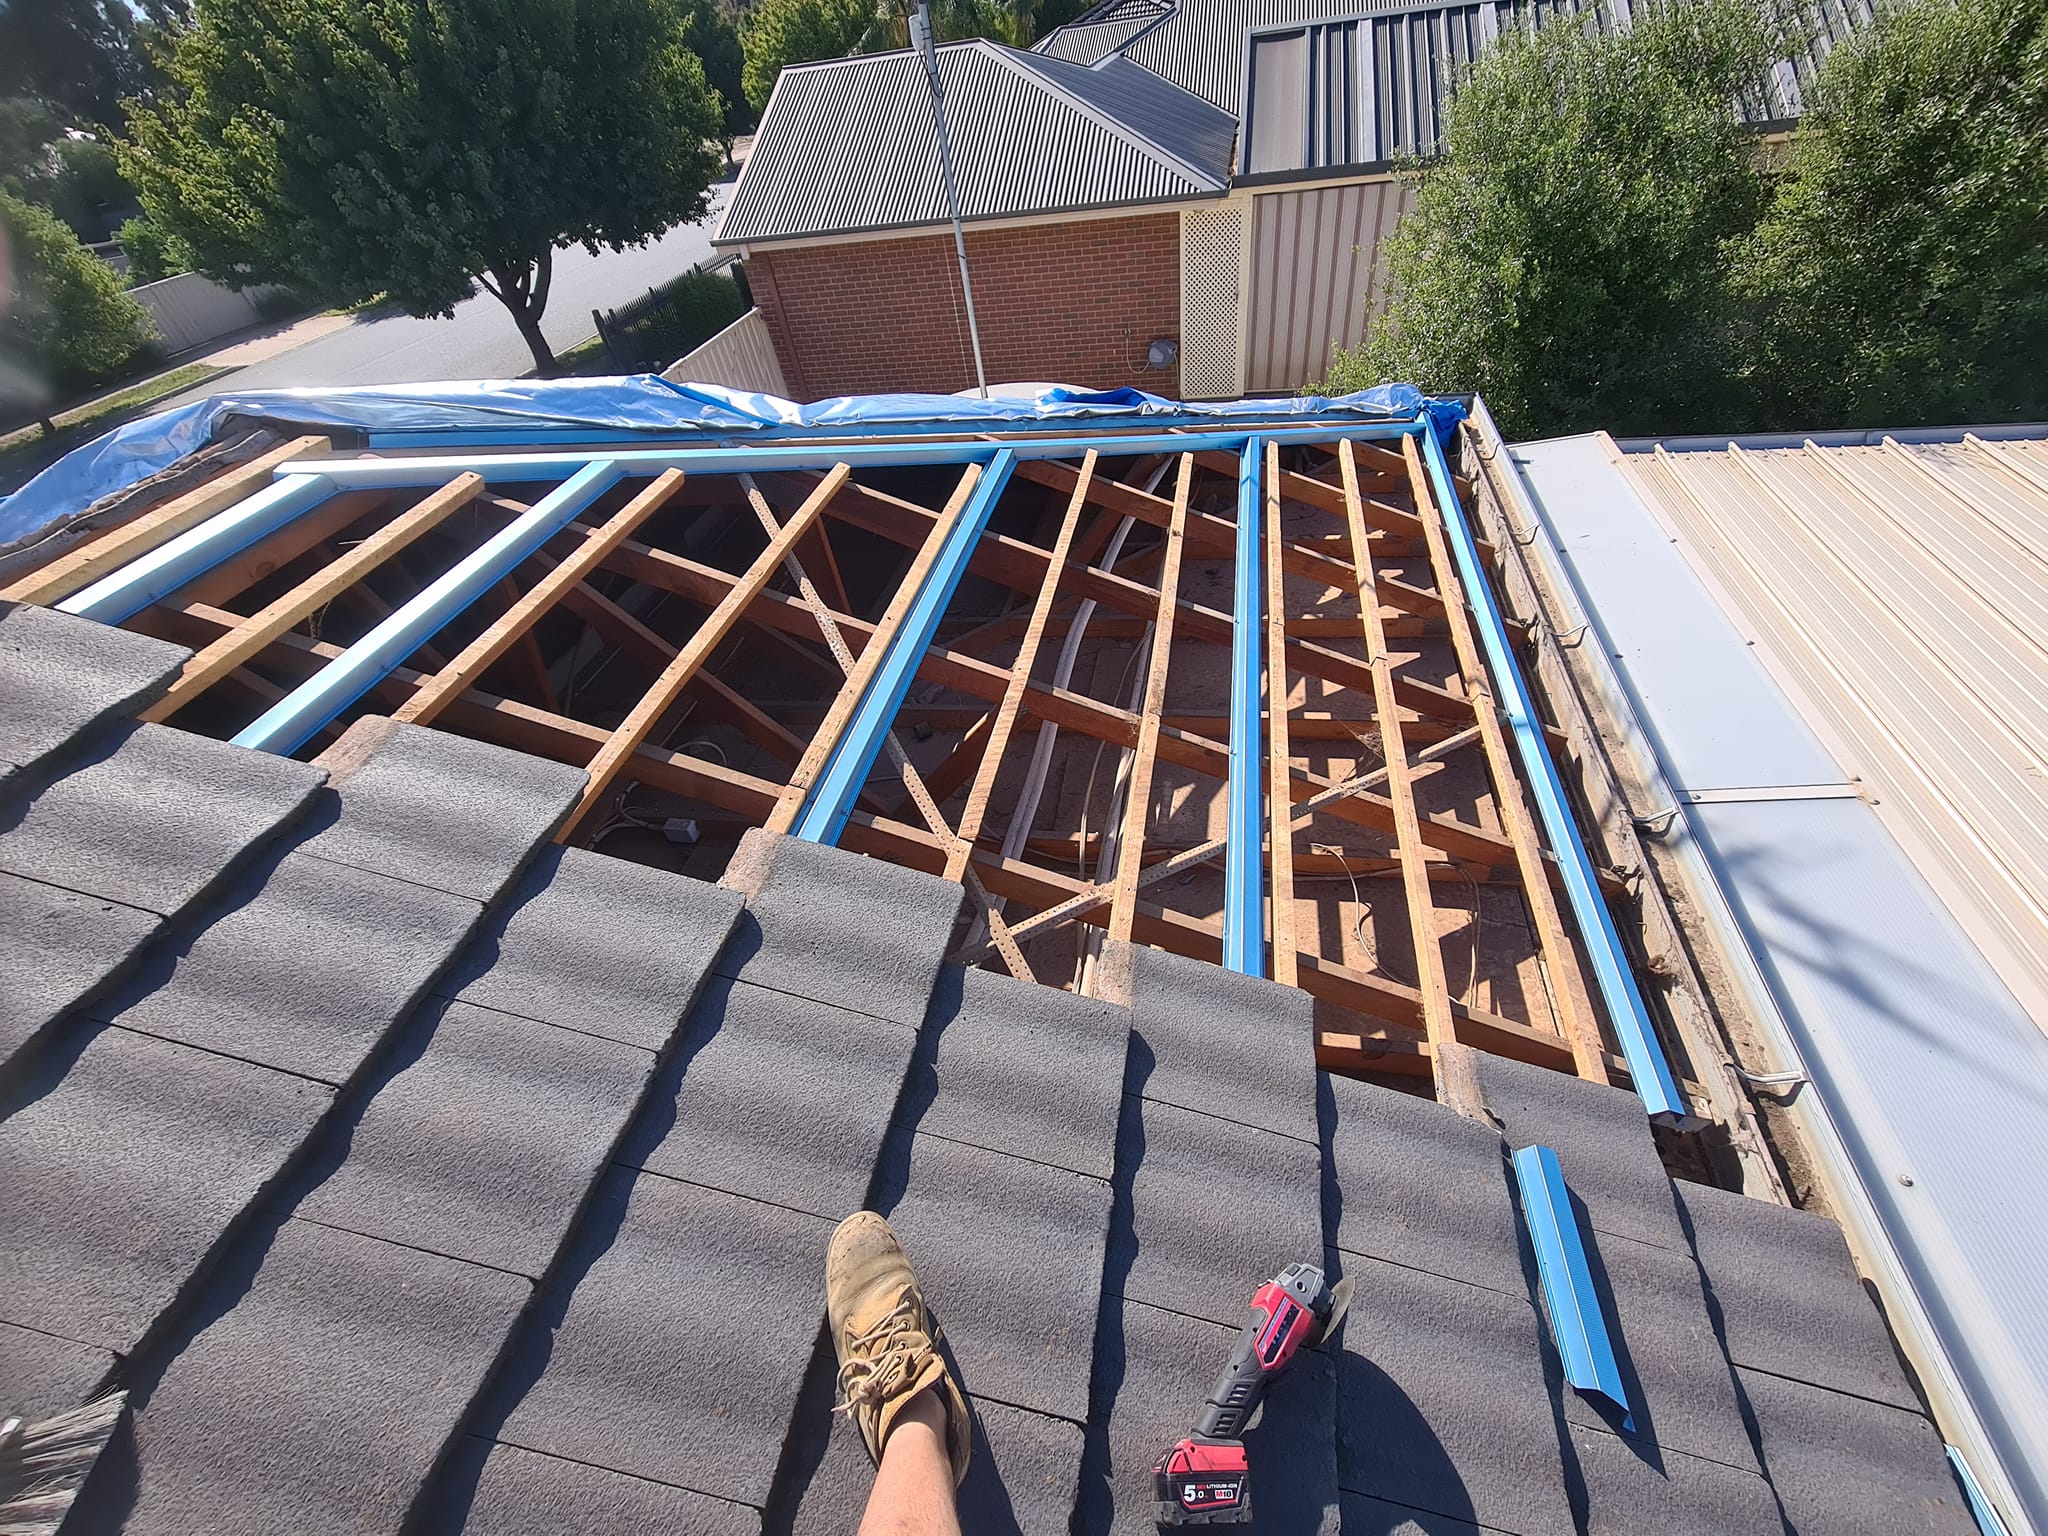 Worker on roof with half roof tiles complete and the other half timber and pipes exposed